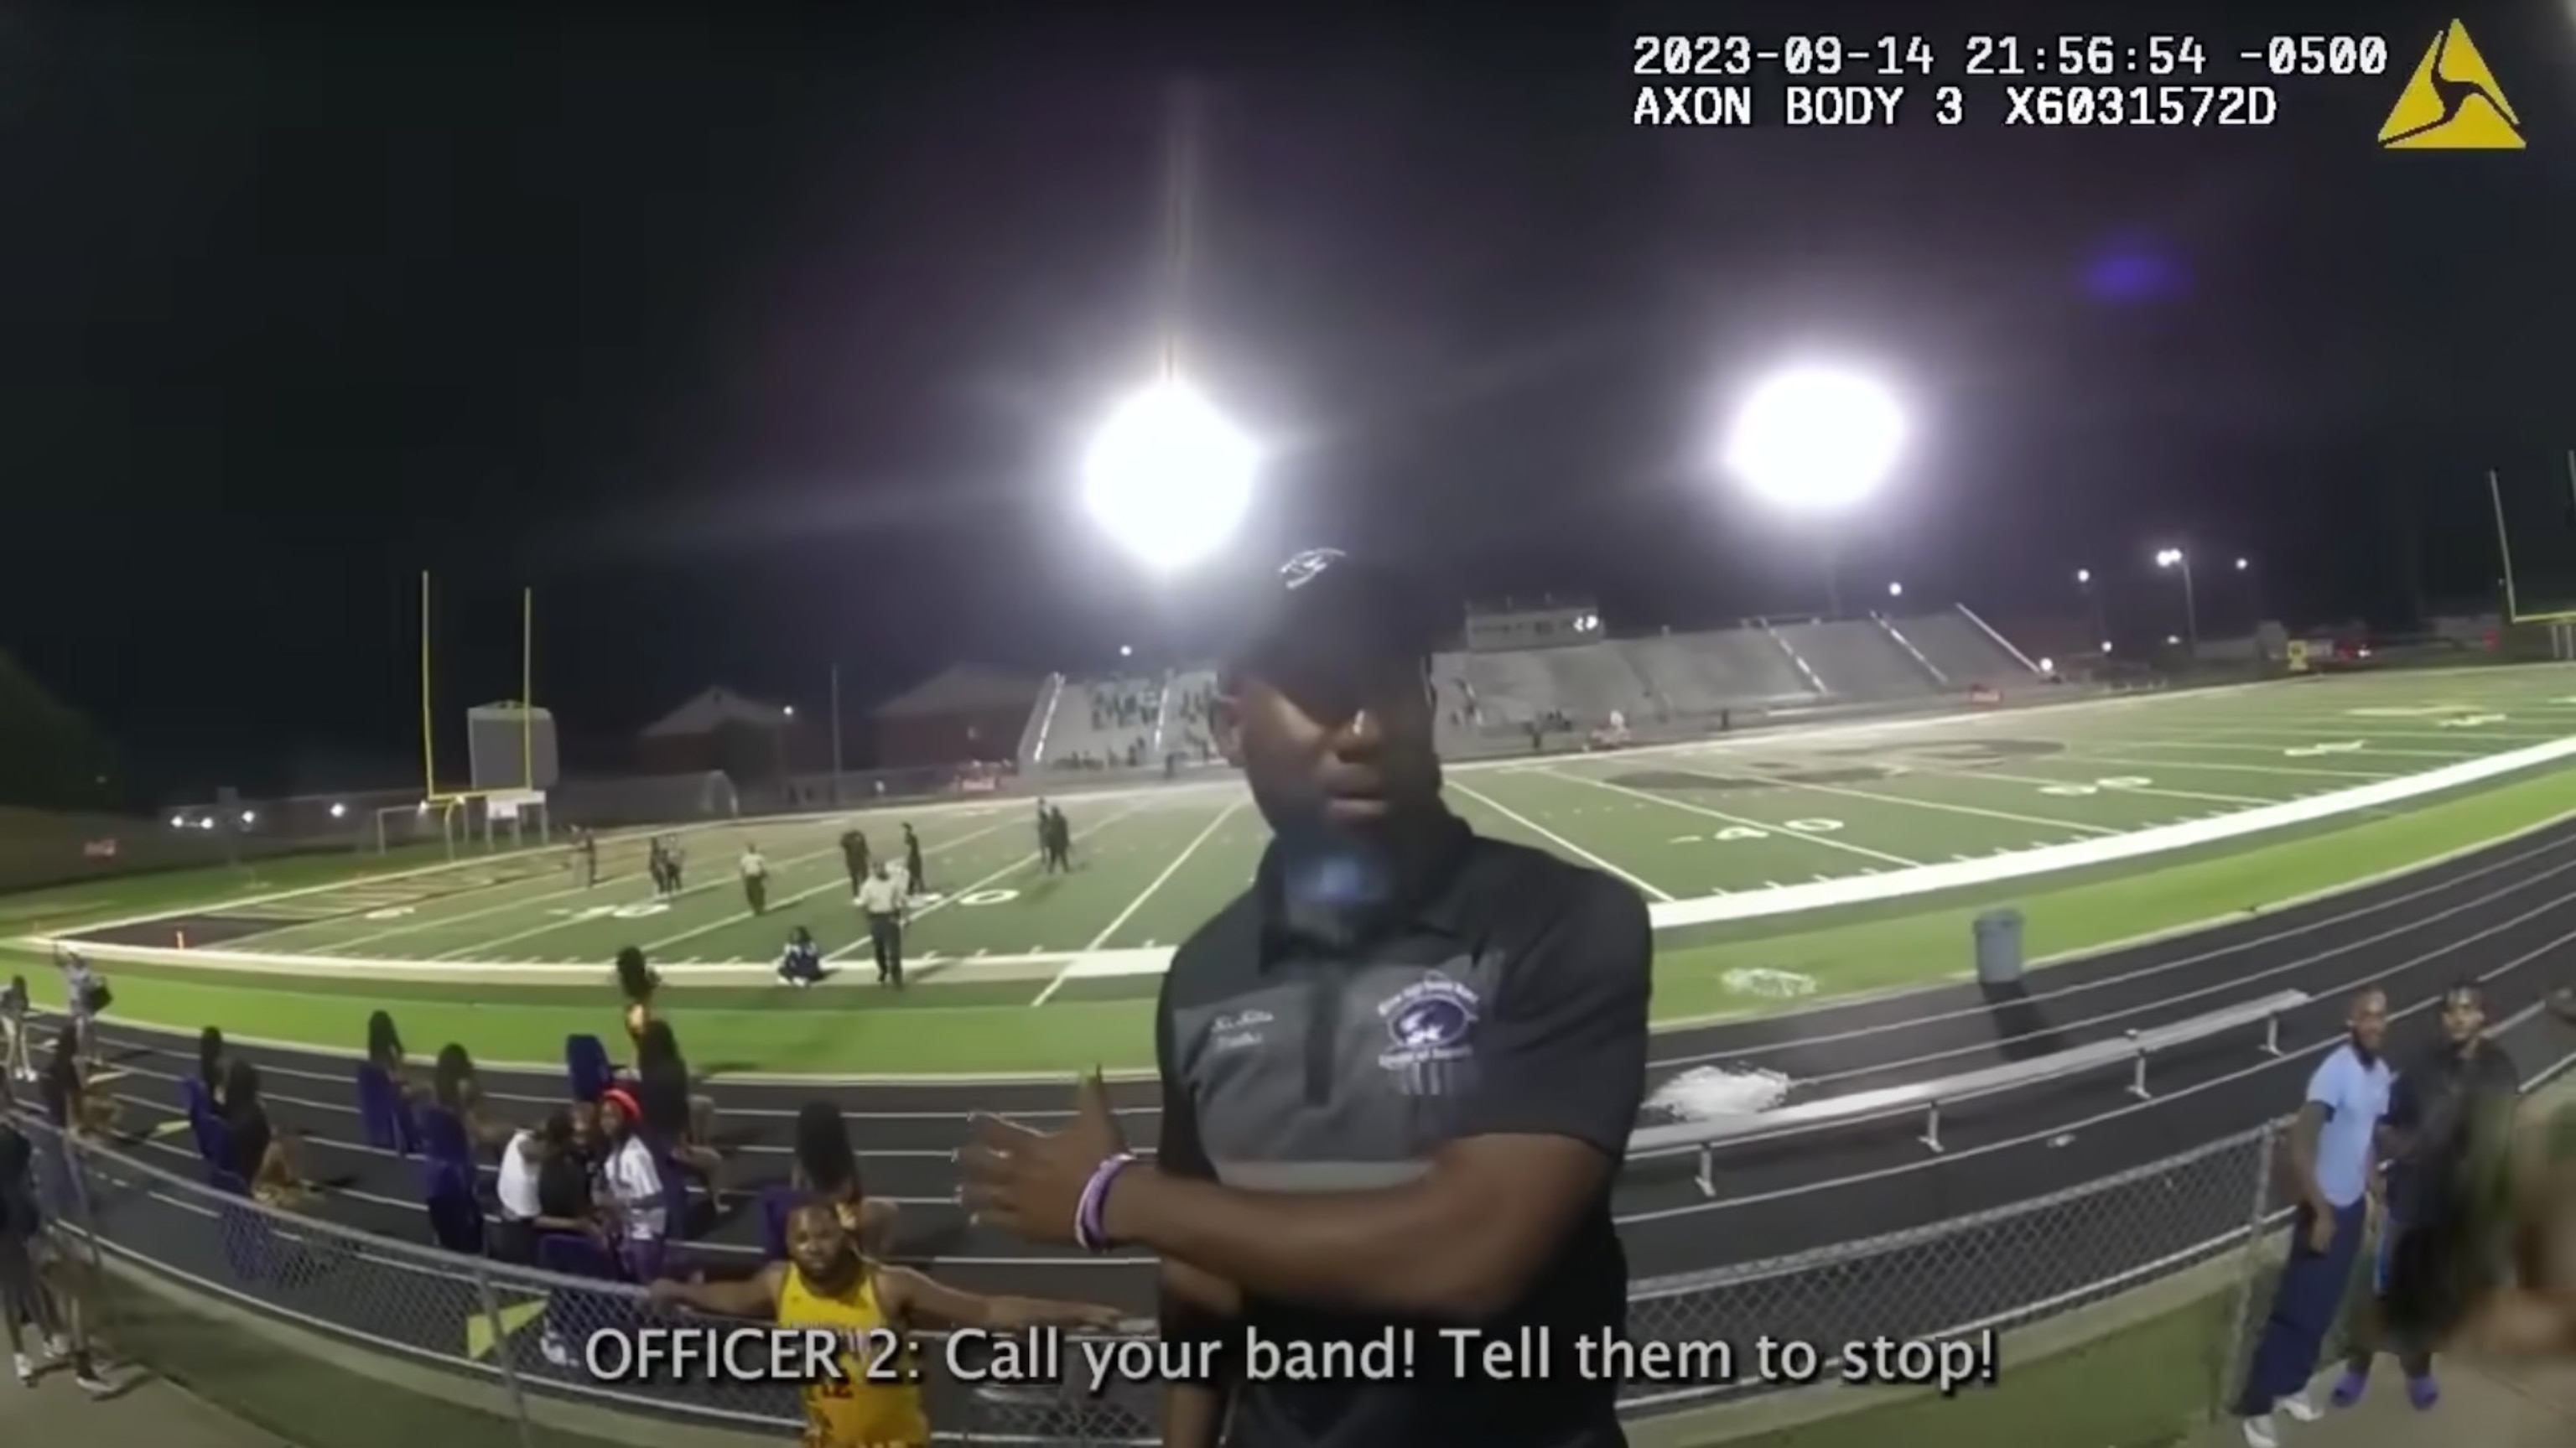 PHOTO: The Birmingham Police Department released body camera footage from the arrest of Minor High School band director Johnny Mims that occurred on Sept. 14, 2023 in Birmingham, Ala.